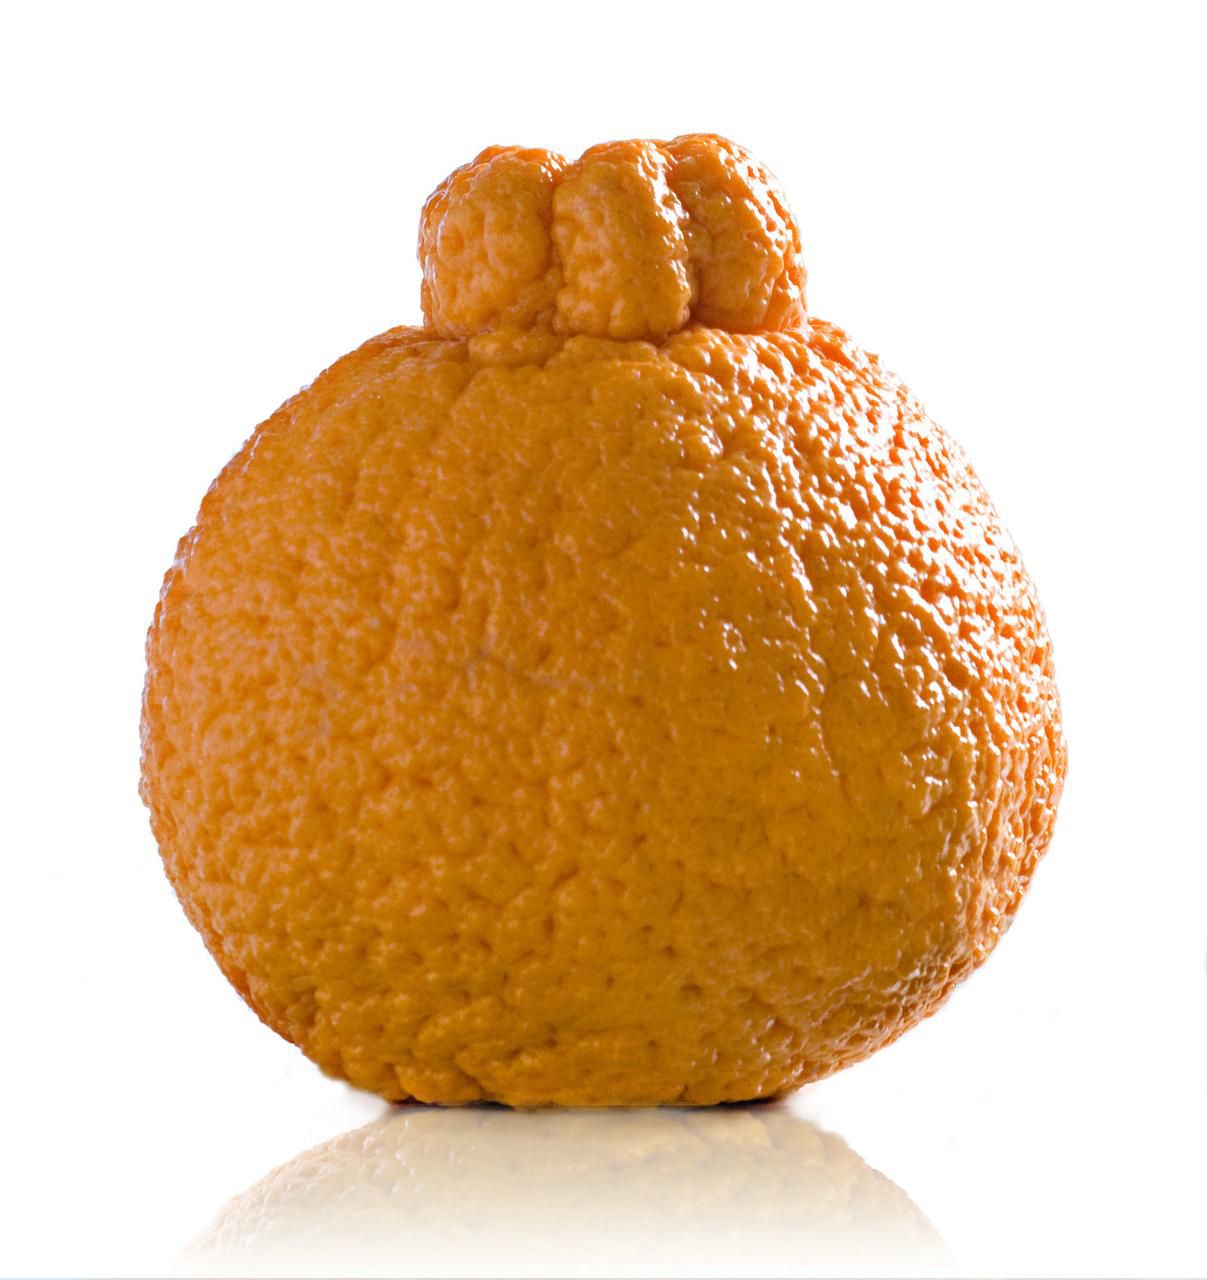 What's the Big Deal About Sumo Oranges?